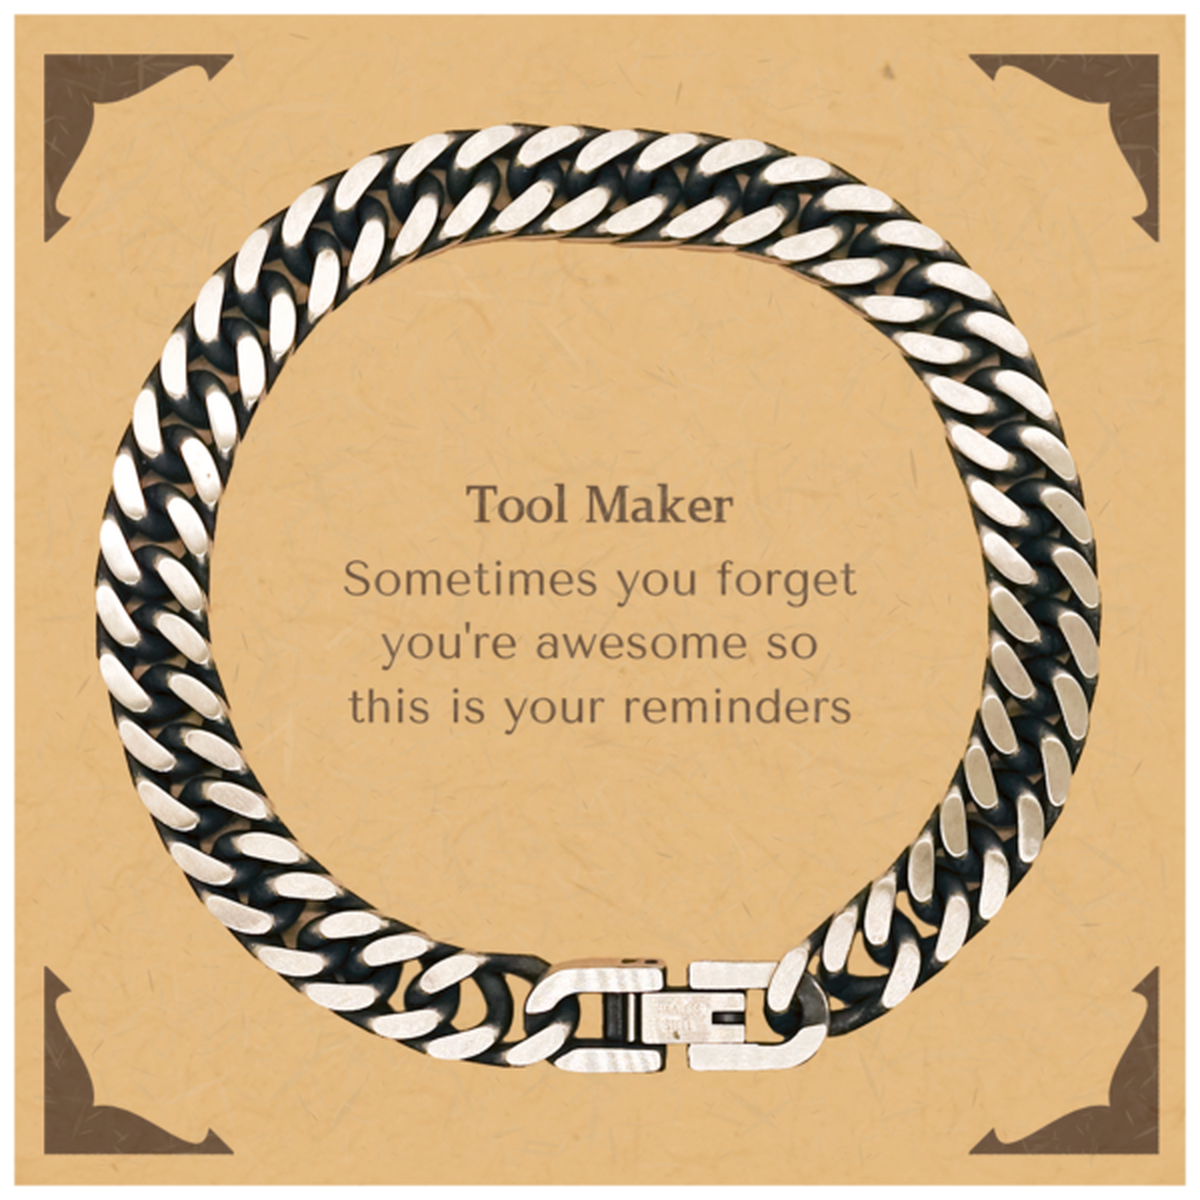 Sentimental Tool Maker Cuban Link Chain Bracelet, Tool Maker Sometimes you forget you're awesome so this is your reminders, Graduation Christmas Birthday Gifts for Tool Maker, Men, Women, Coworkers